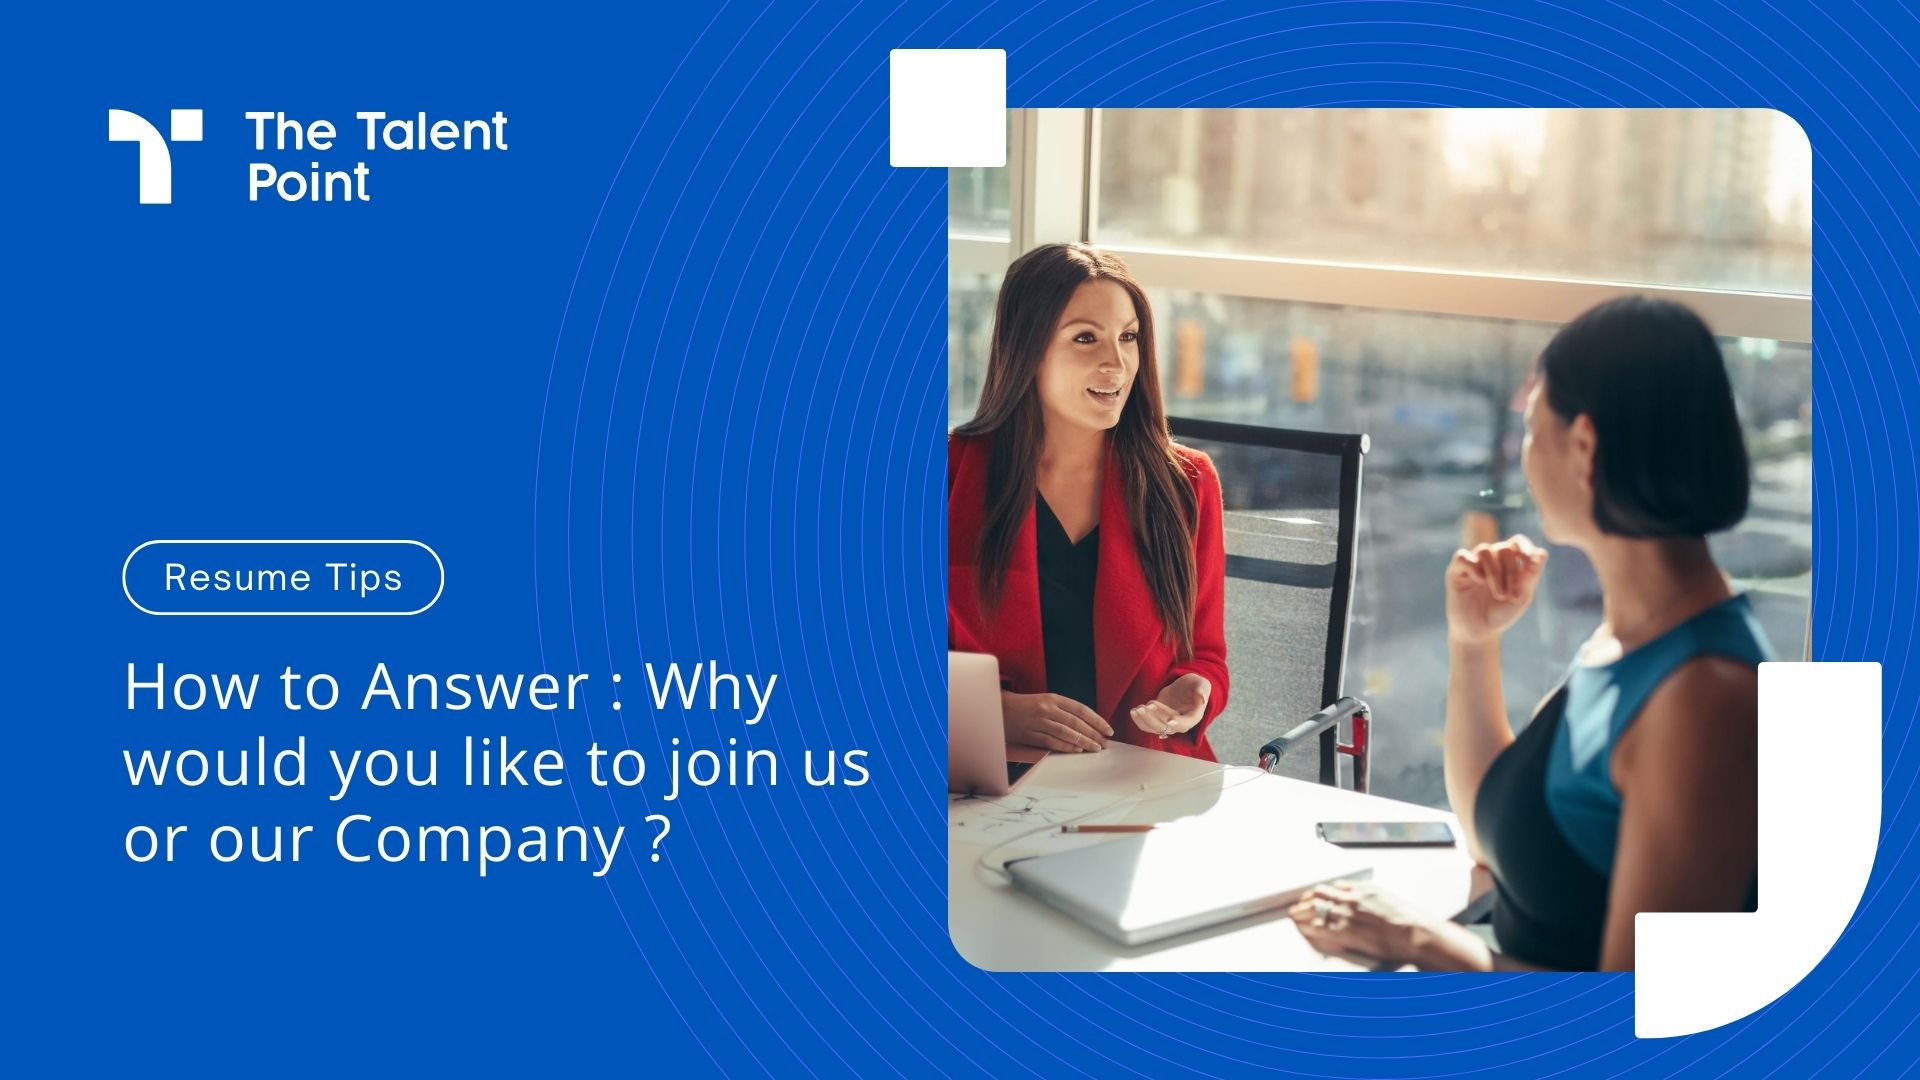 How to Answer : Why would you like to join us or our Company ?